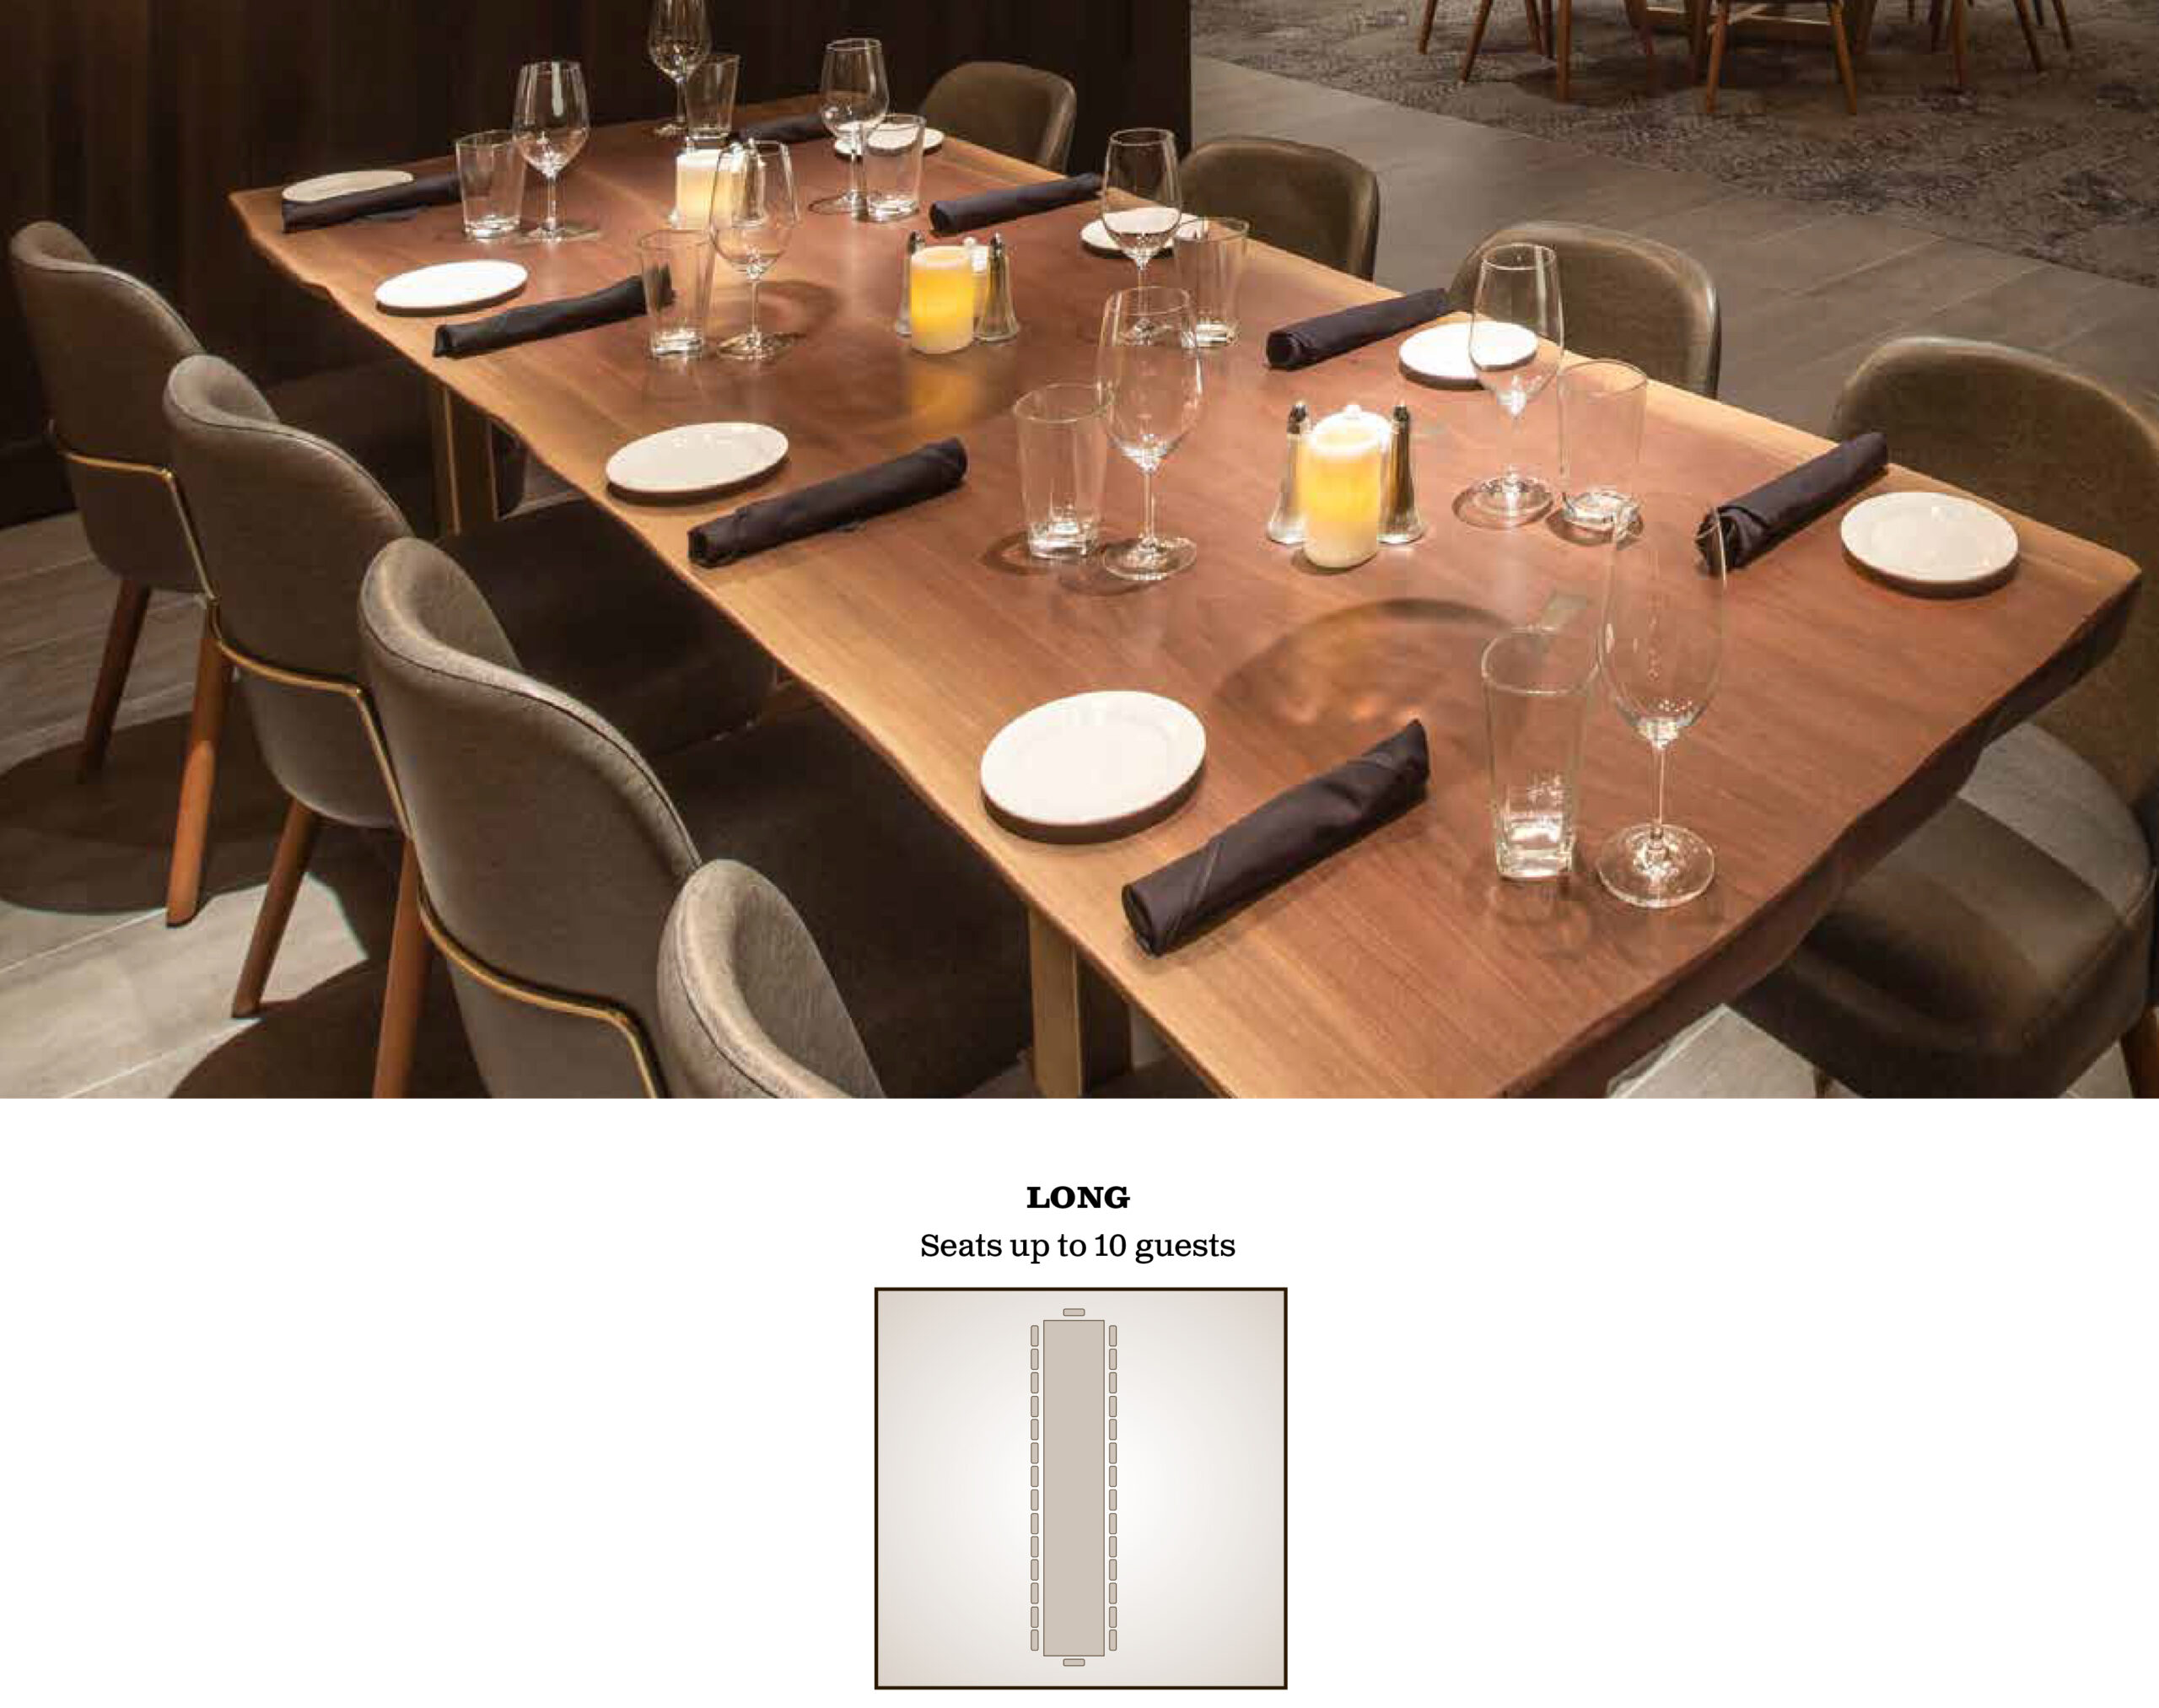 Table 79 Room, Seats up to 10 guests